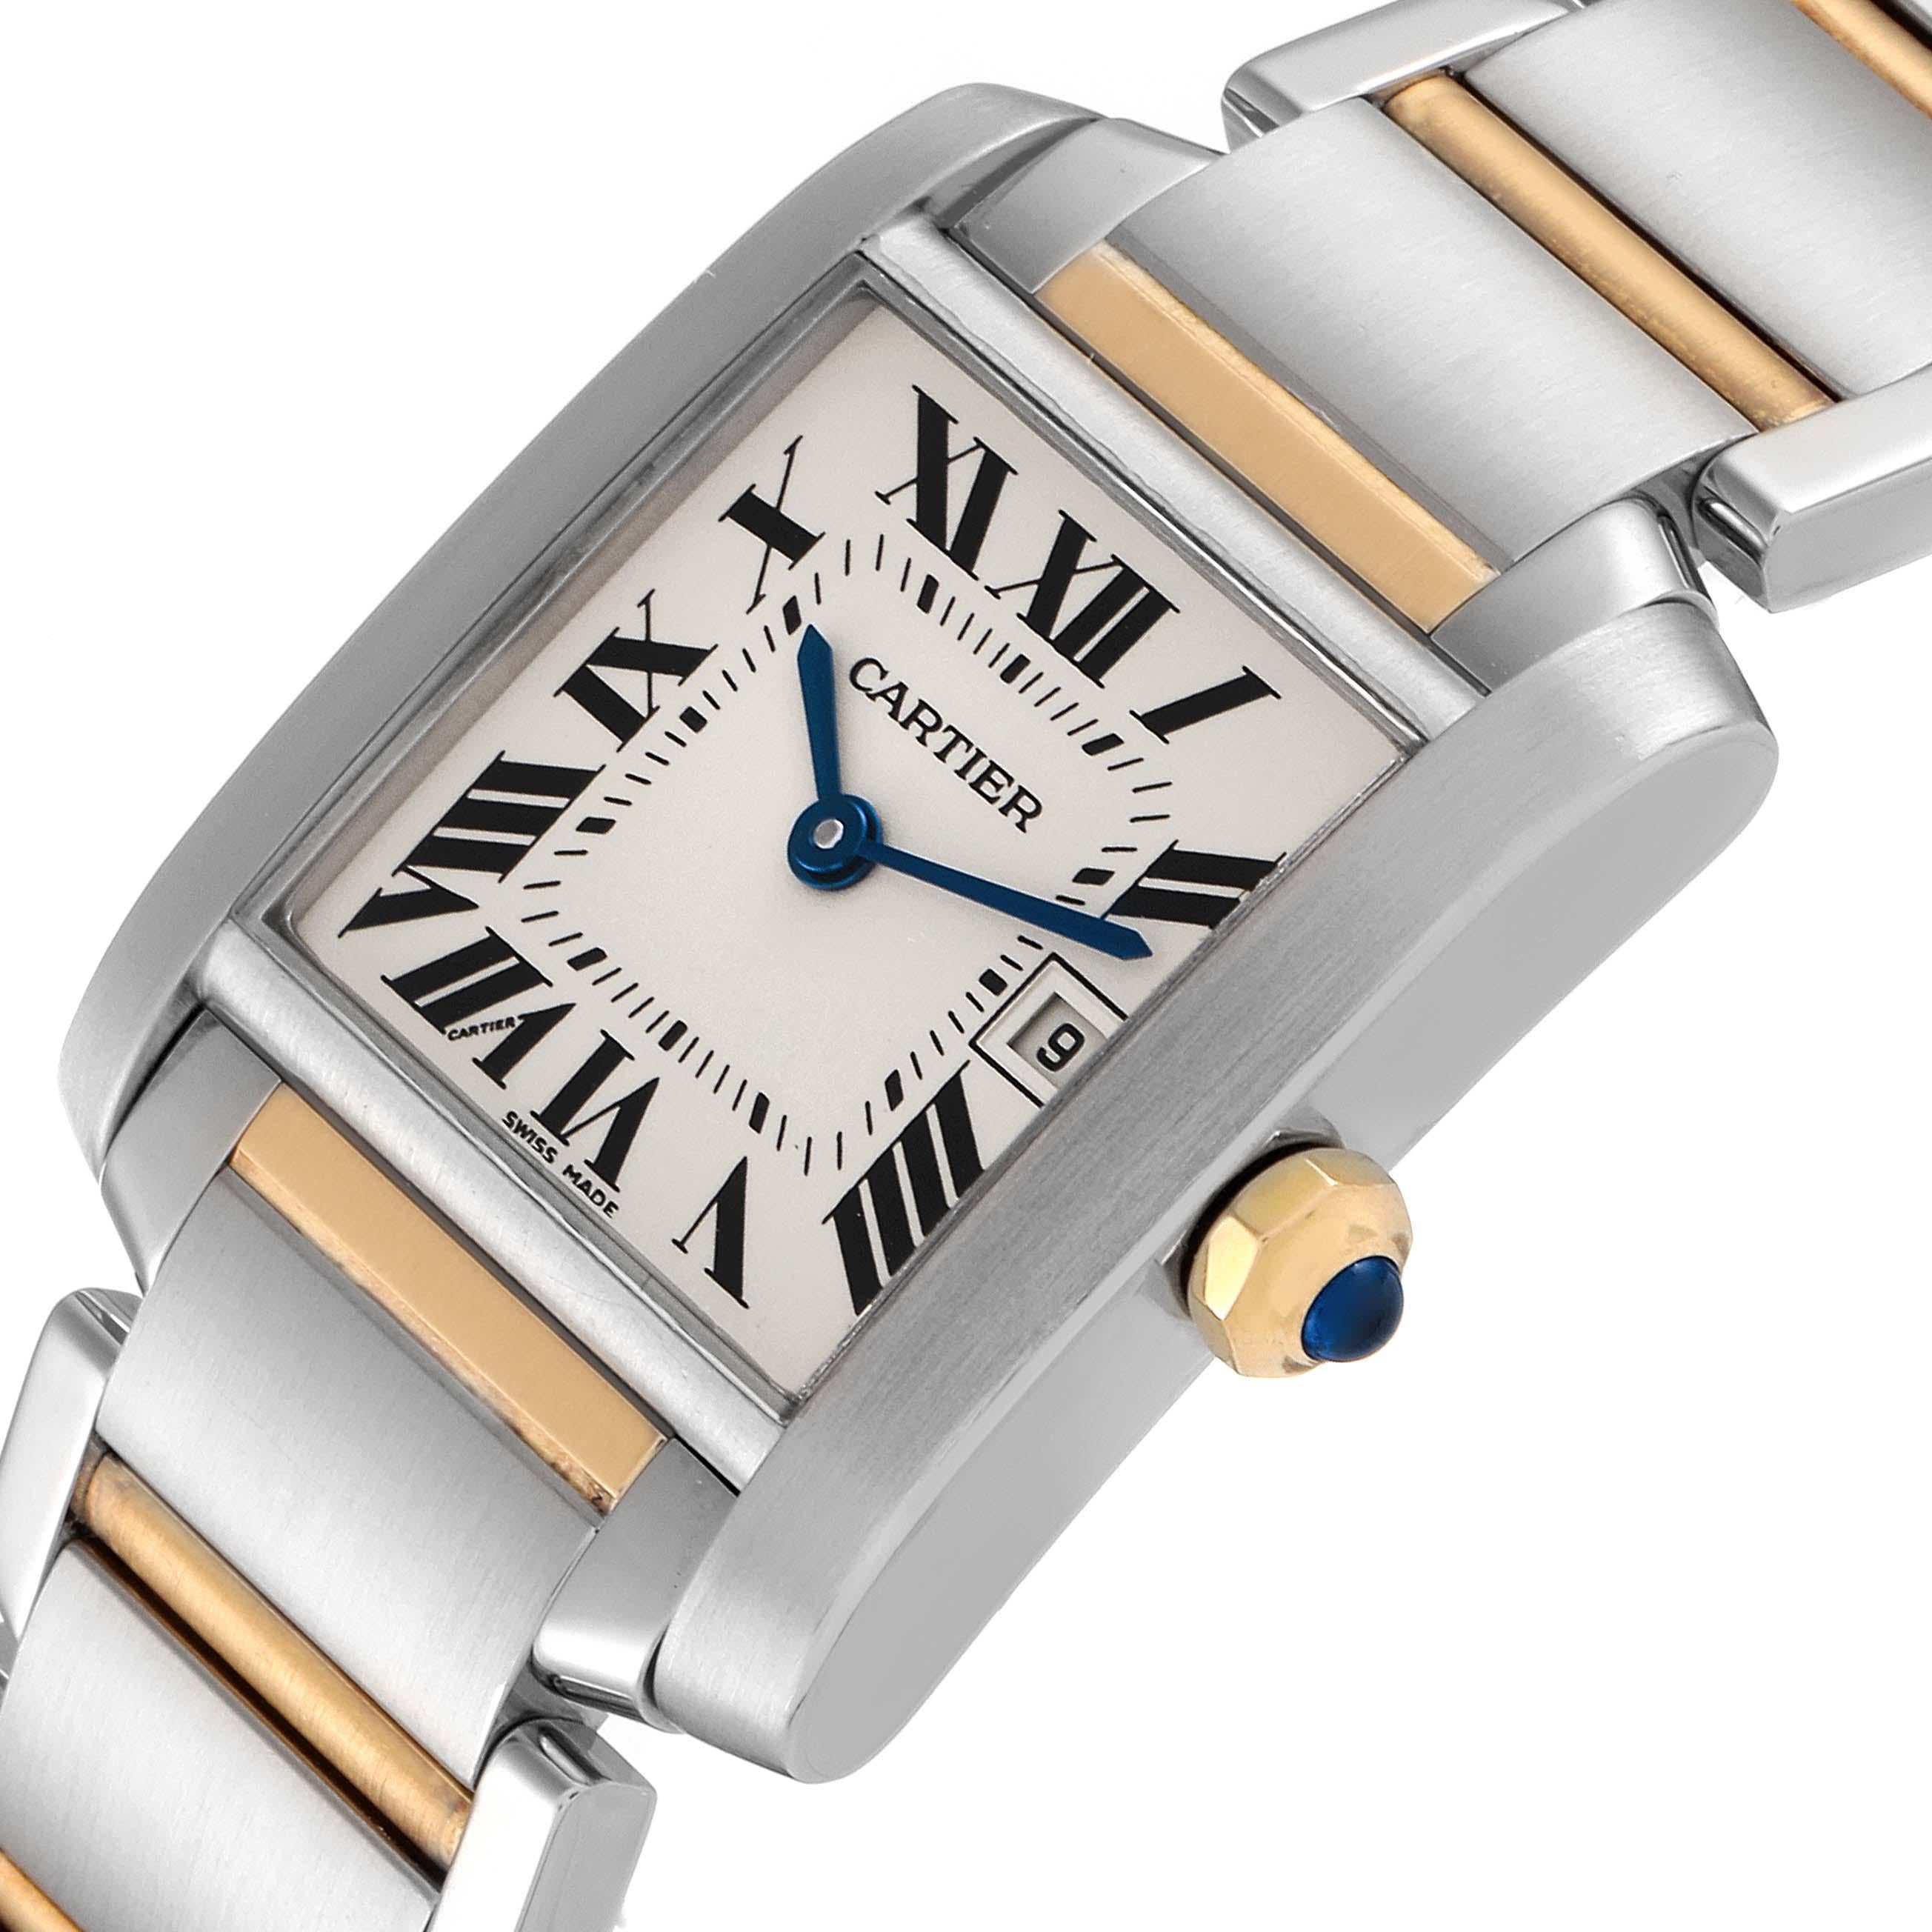 Cartier Tank Francaise Midsize Steel Yellow Gold Ladies Watch W51012Q4 In Excellent Condition For Sale In Atlanta, GA